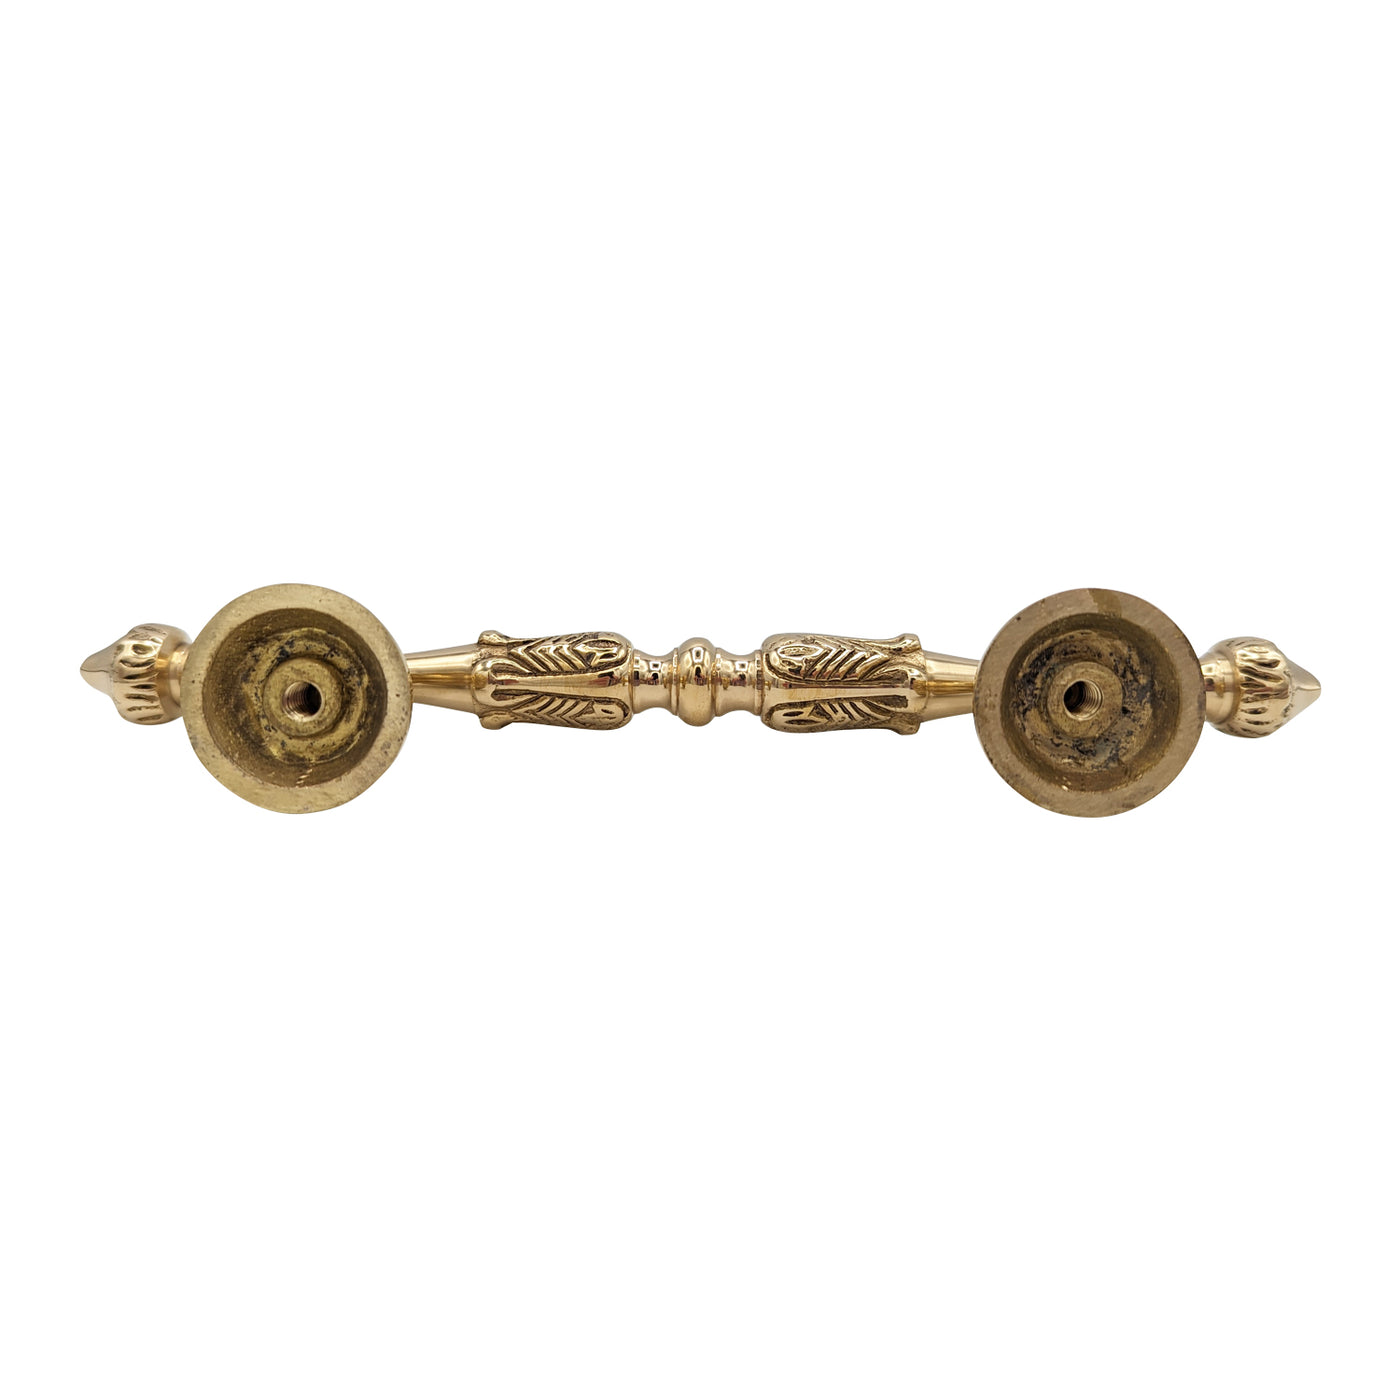 8 Inch (4 1/2 Inch C-C) Solid Brass French Empire Door Pull